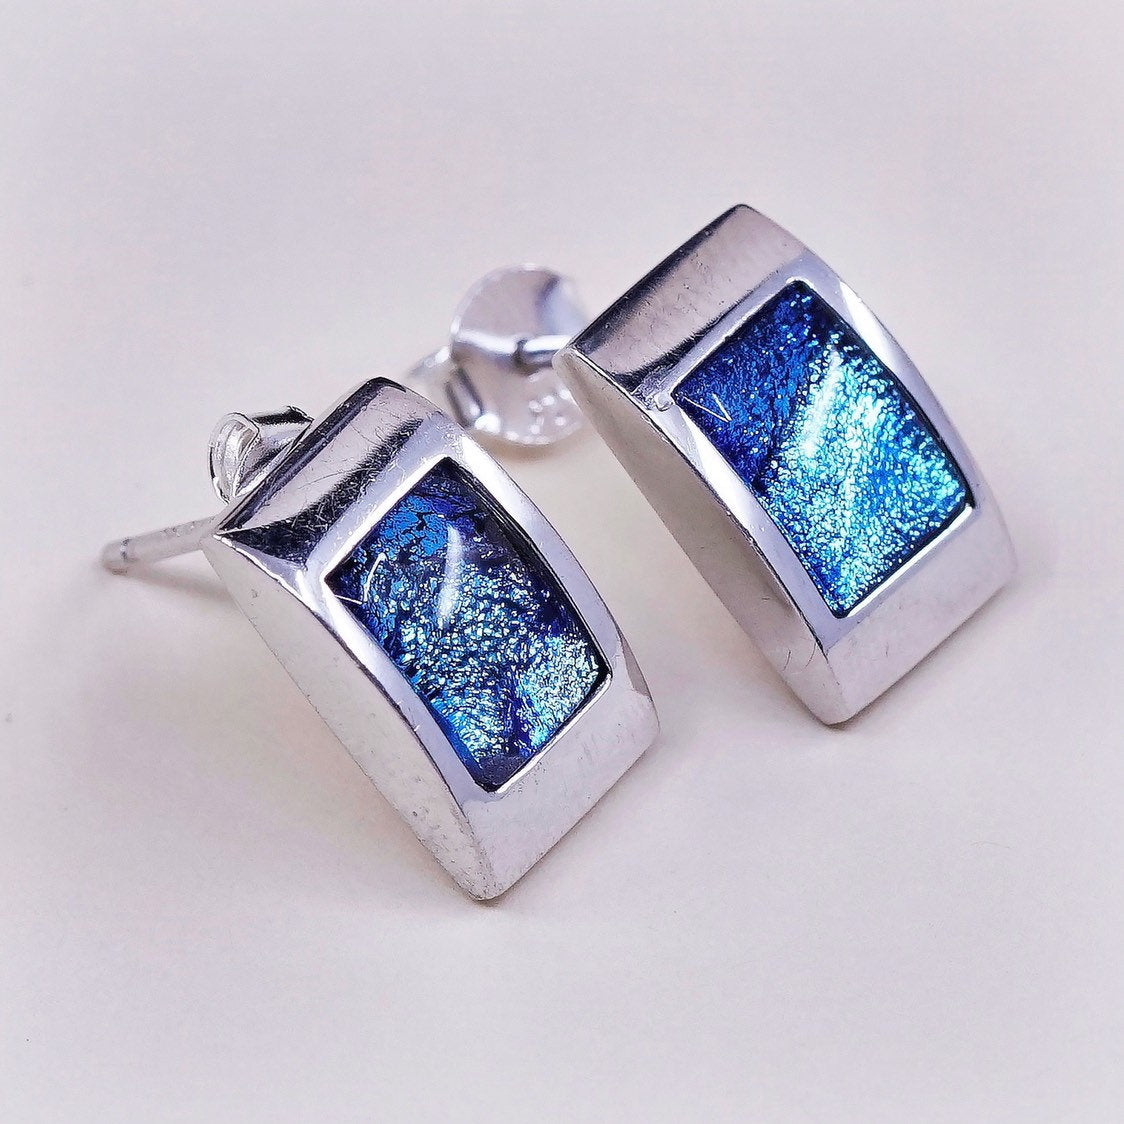 sarah's hope jewelry, sterling 925 silver earrings w/ Foiled glass